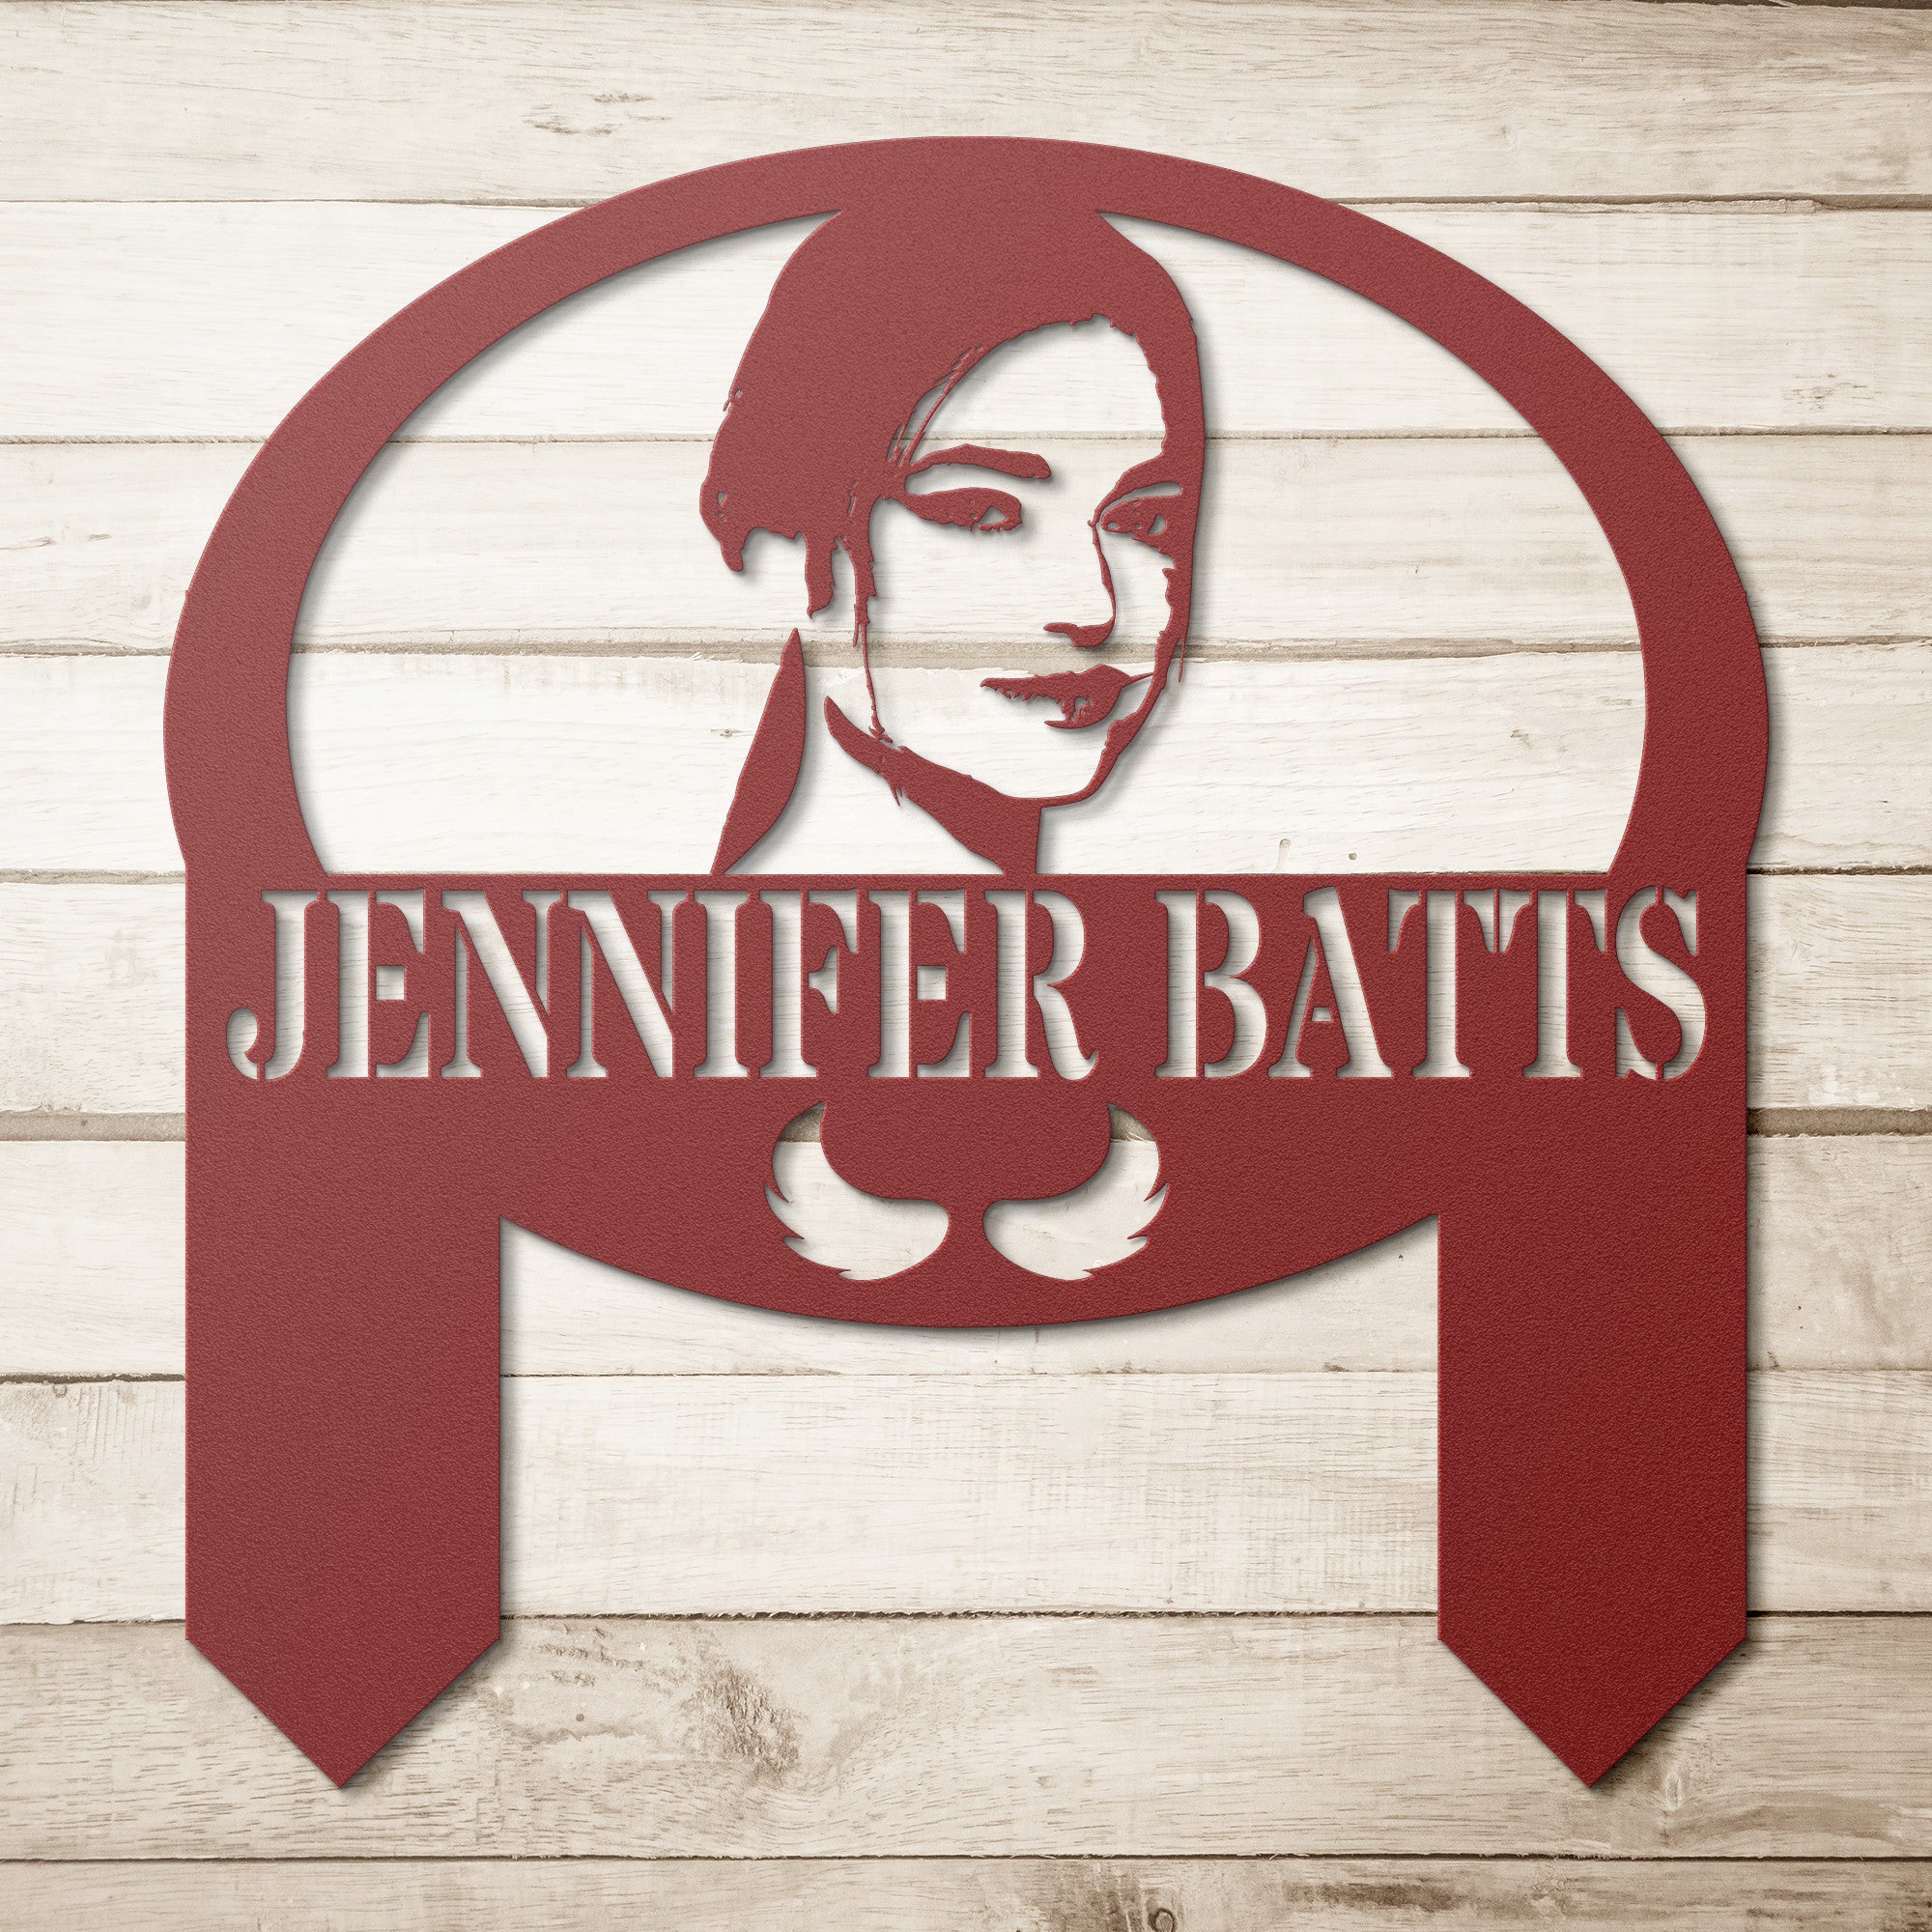 Personalized Portrait Stake Sign - Cool Metal Signs